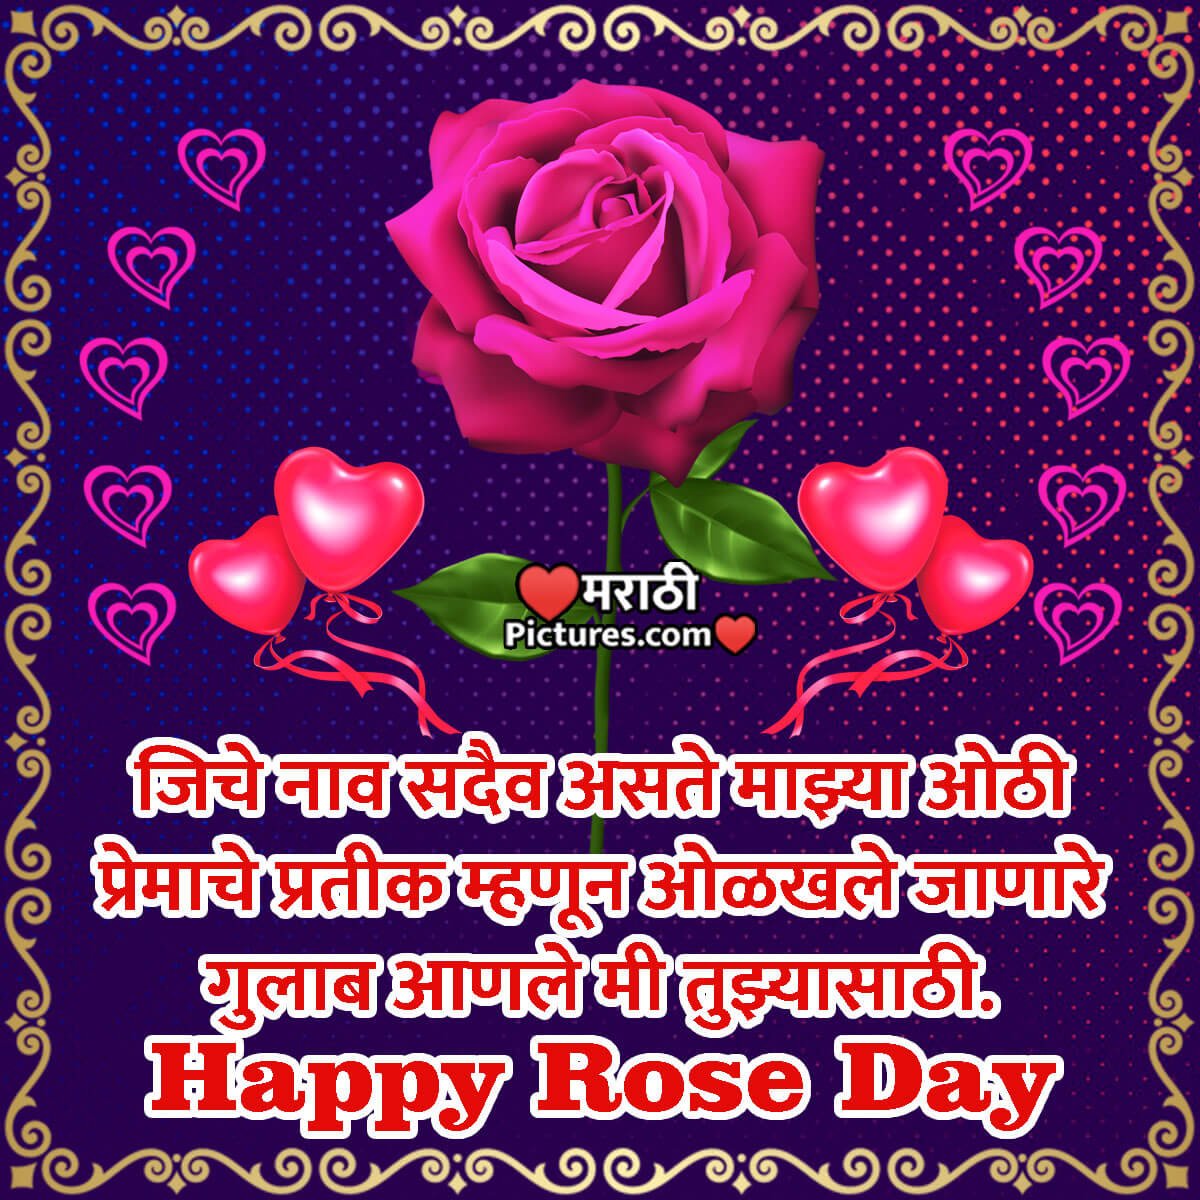 Happy Rose Day Love Message In Marathi